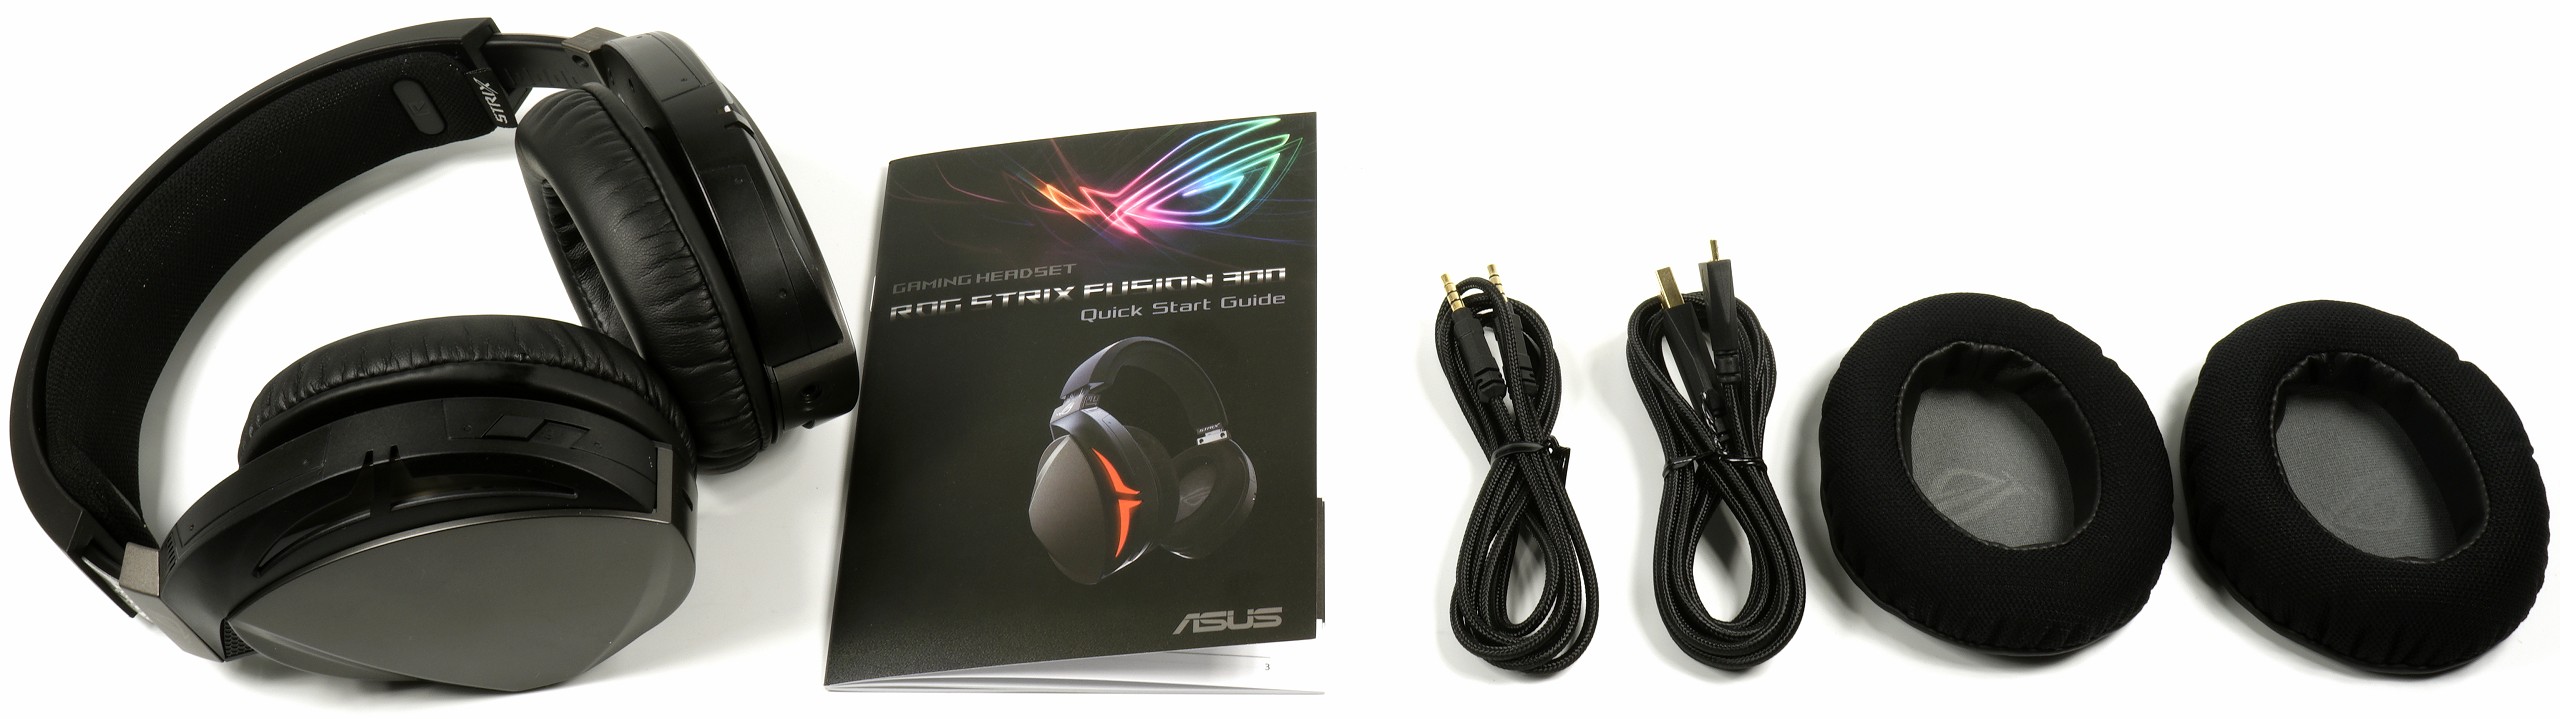 In Review Asus Rog Strix Fusion 300 7 1 Headset Igor Slab